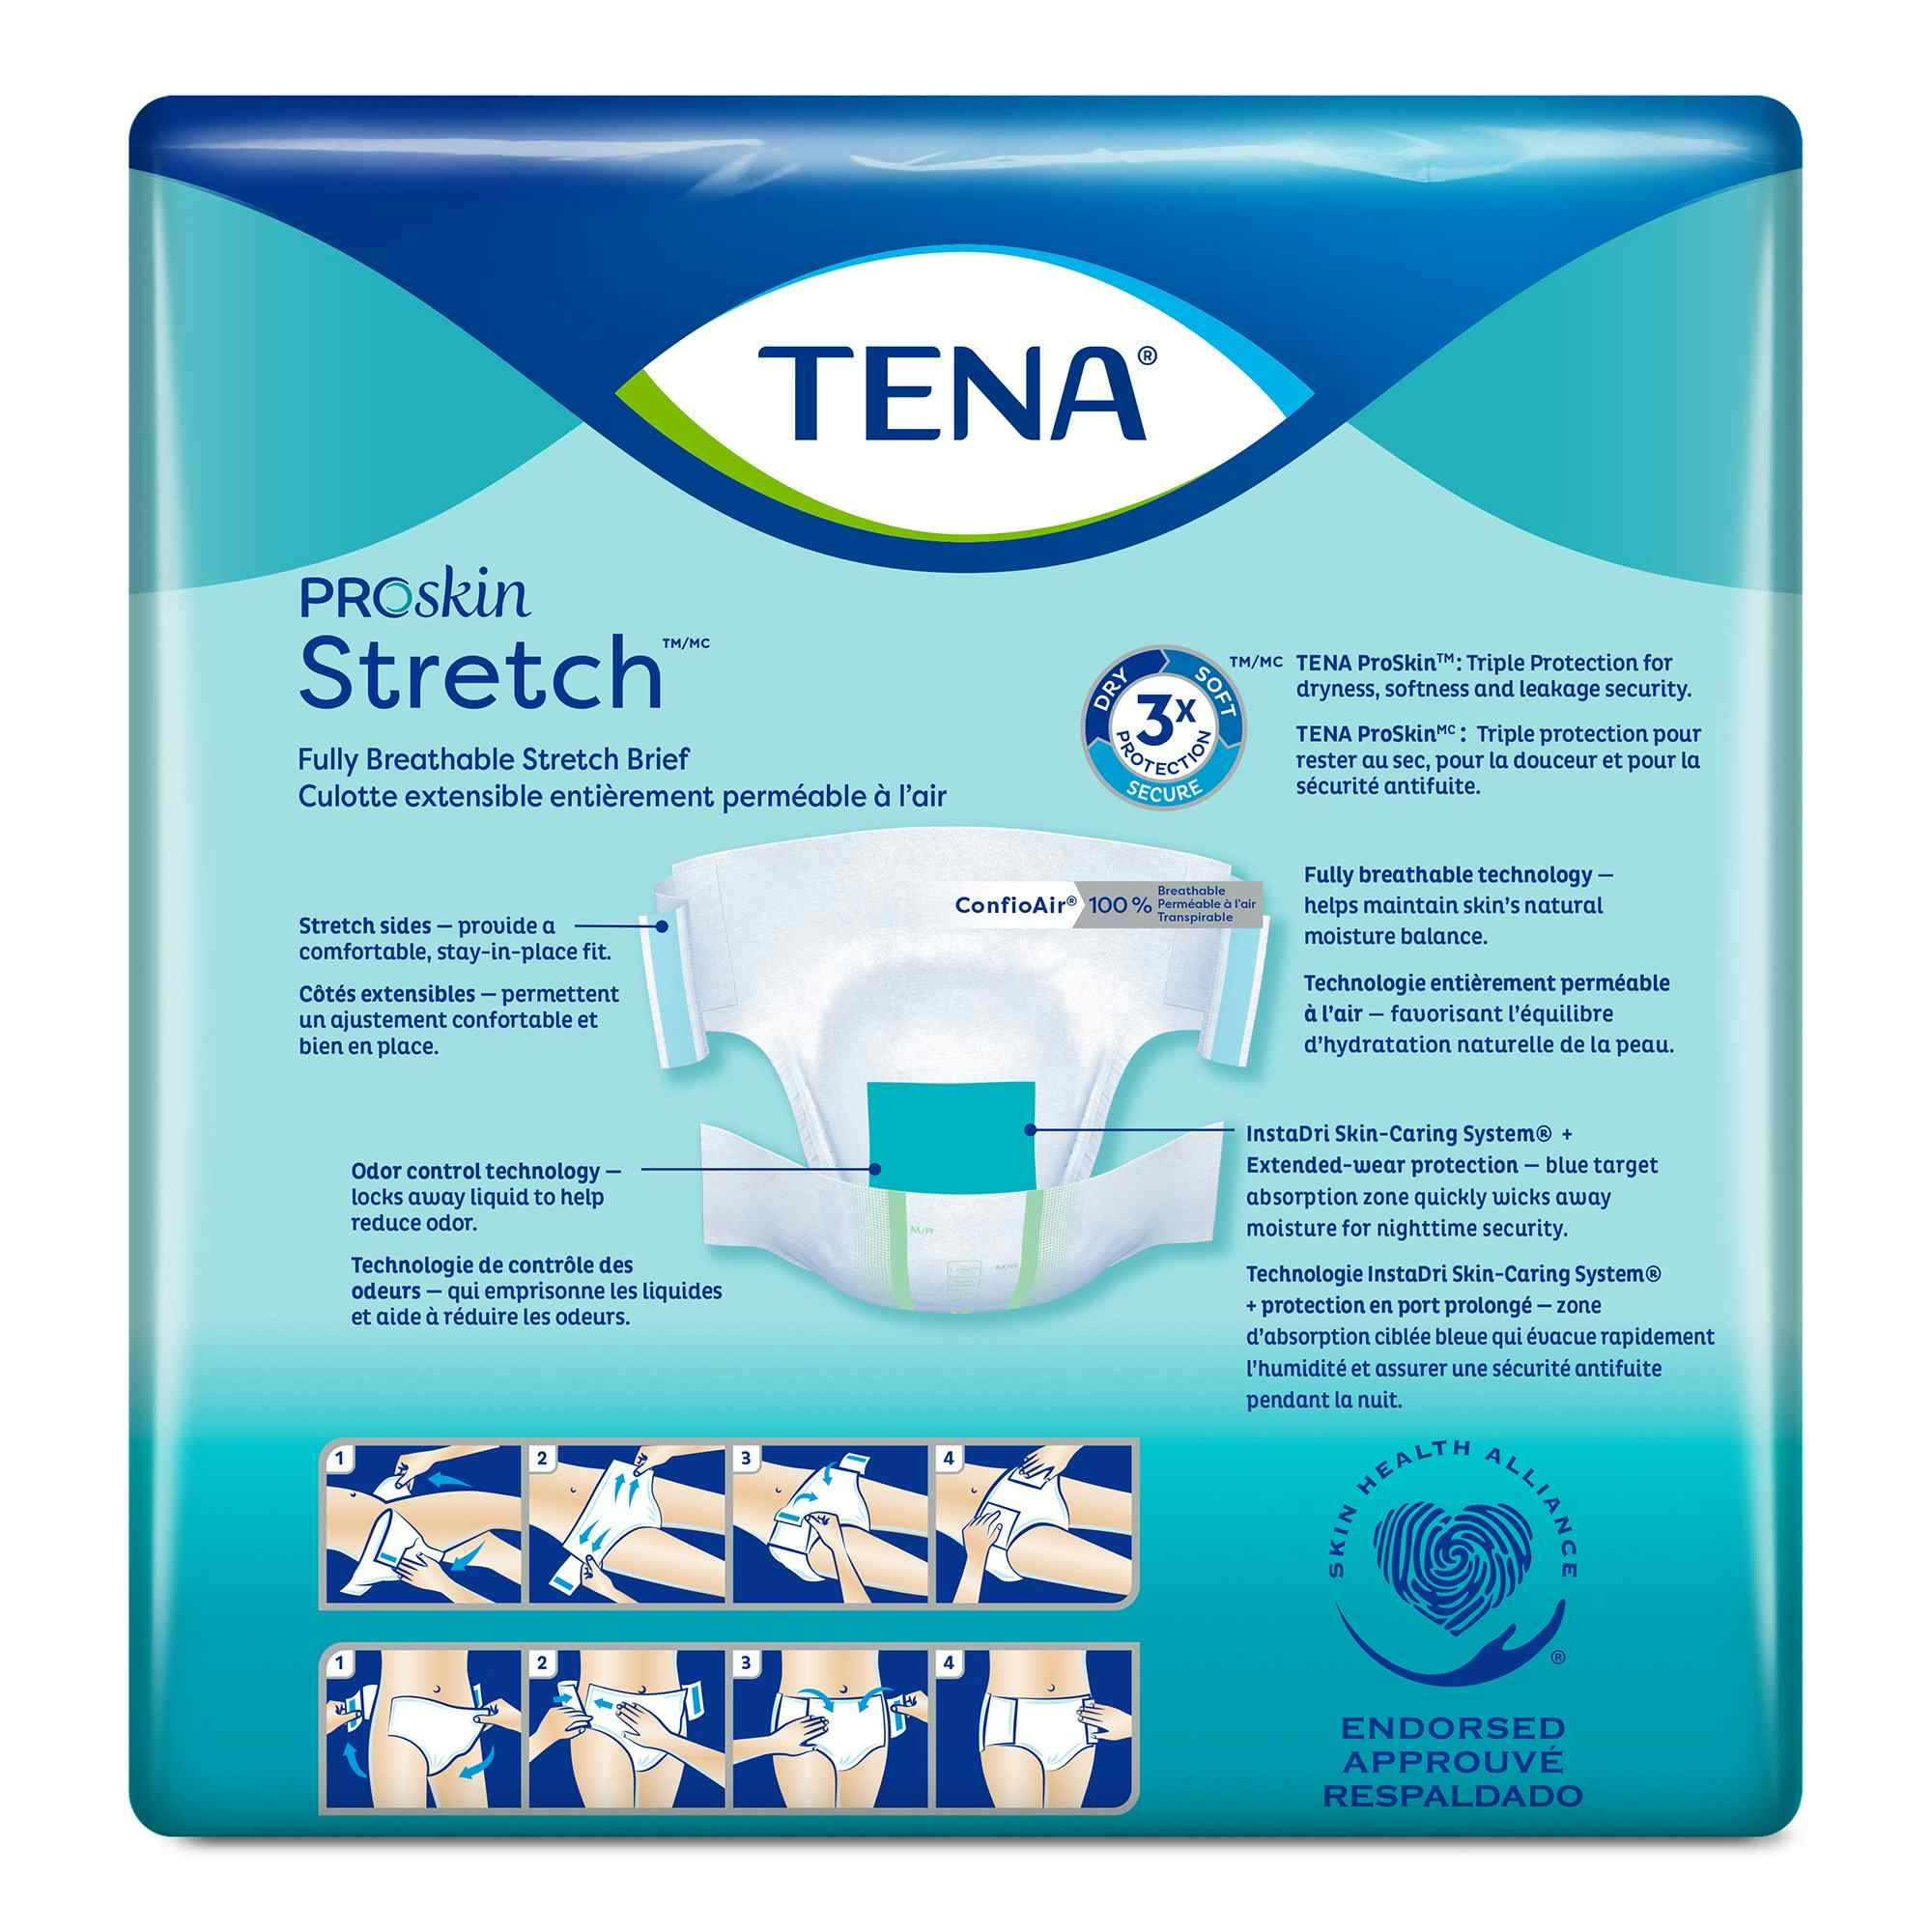 TENA Stretch Super Incontinence Adult Diaper, Super Absorbency, 67902, Medium, Pack of 28